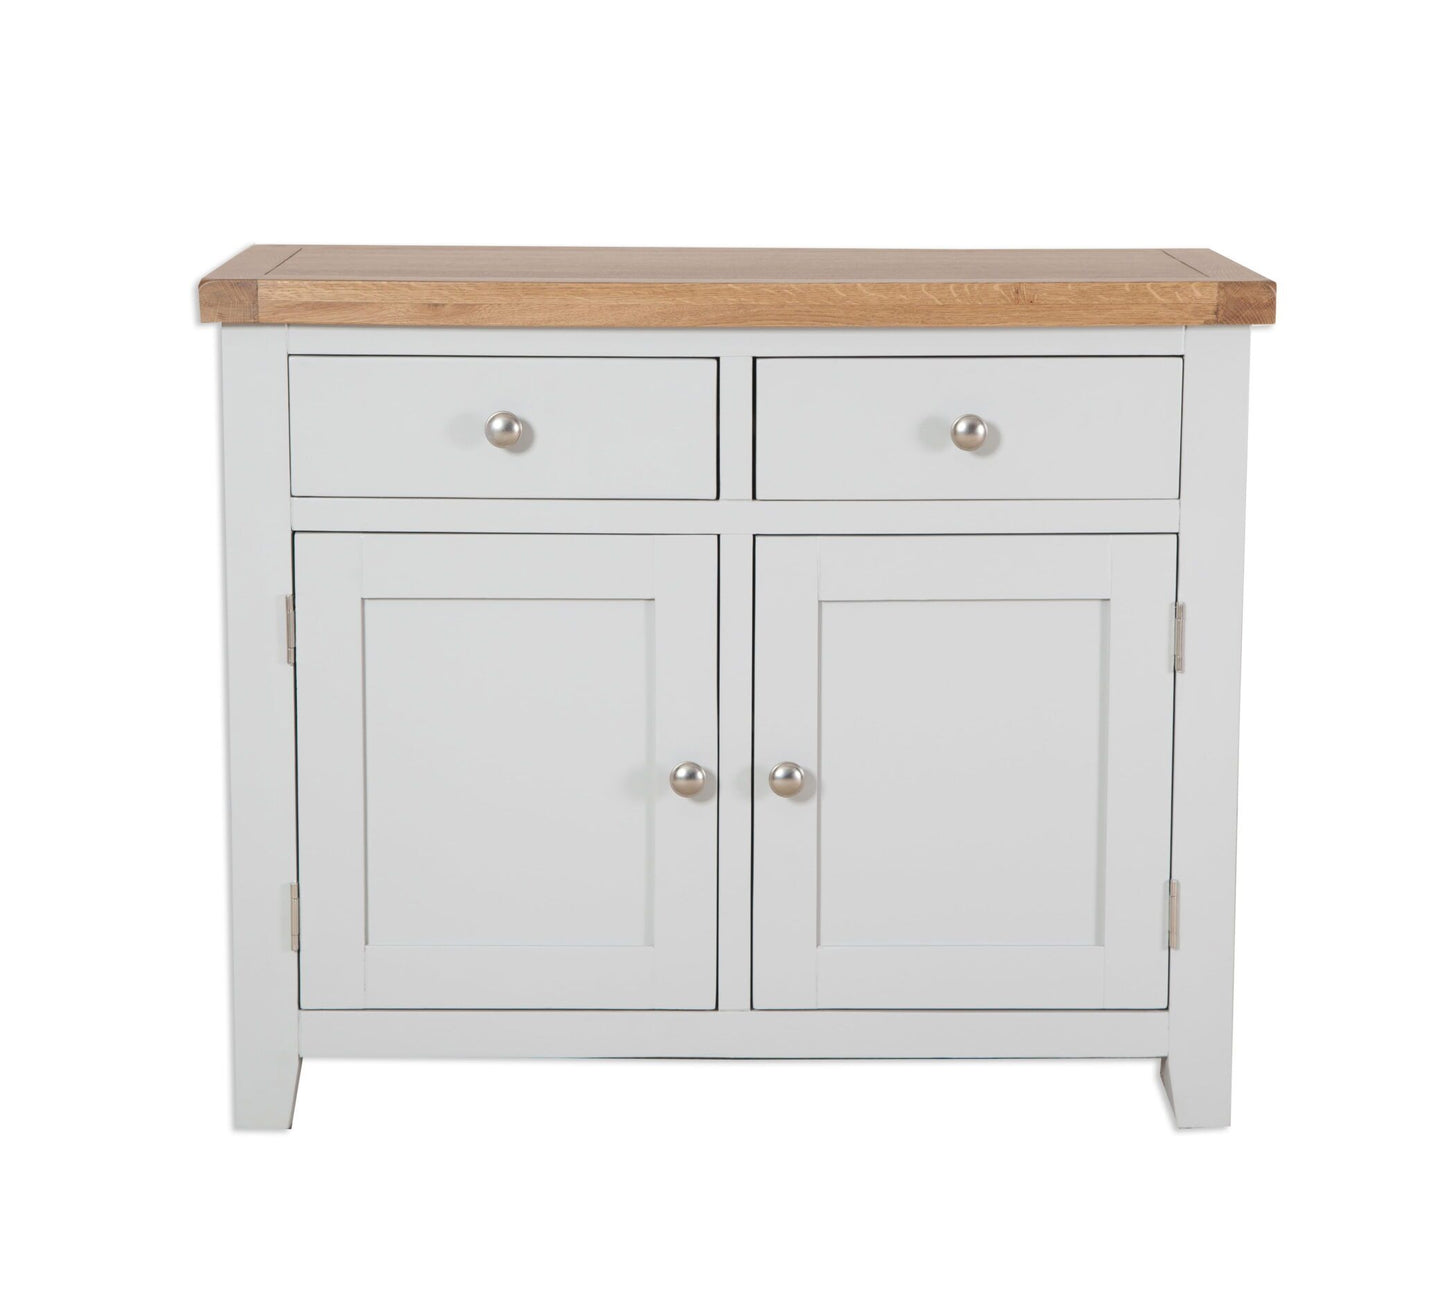 French Grey Painted Sideboard 2 Door 2 Drawer